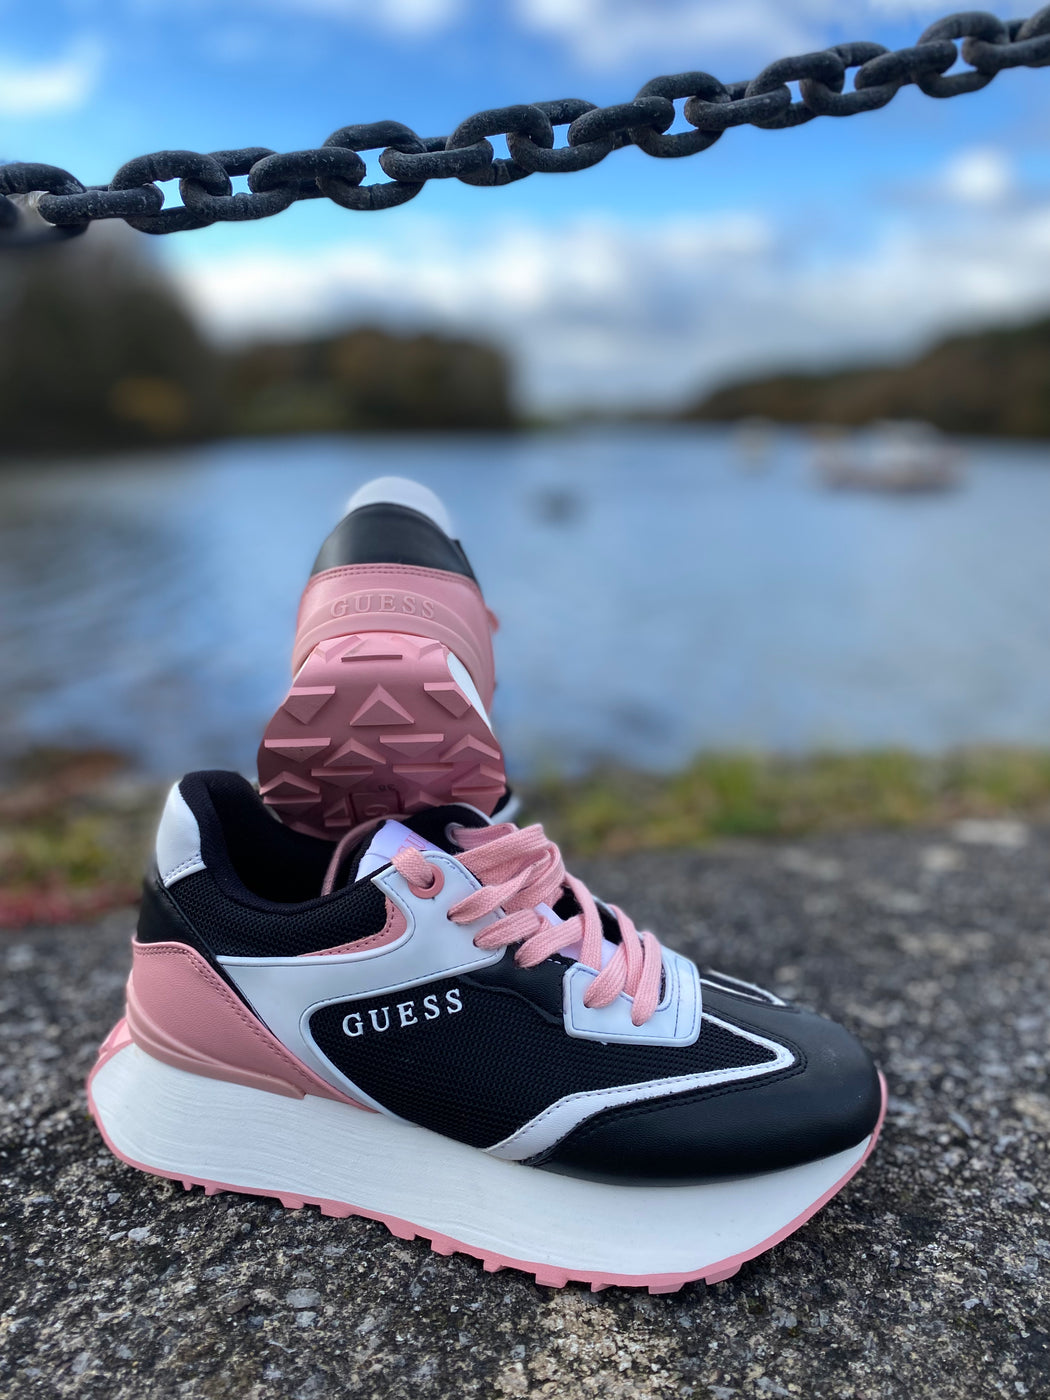 FL7UCHELE12 Guess black pink trainers